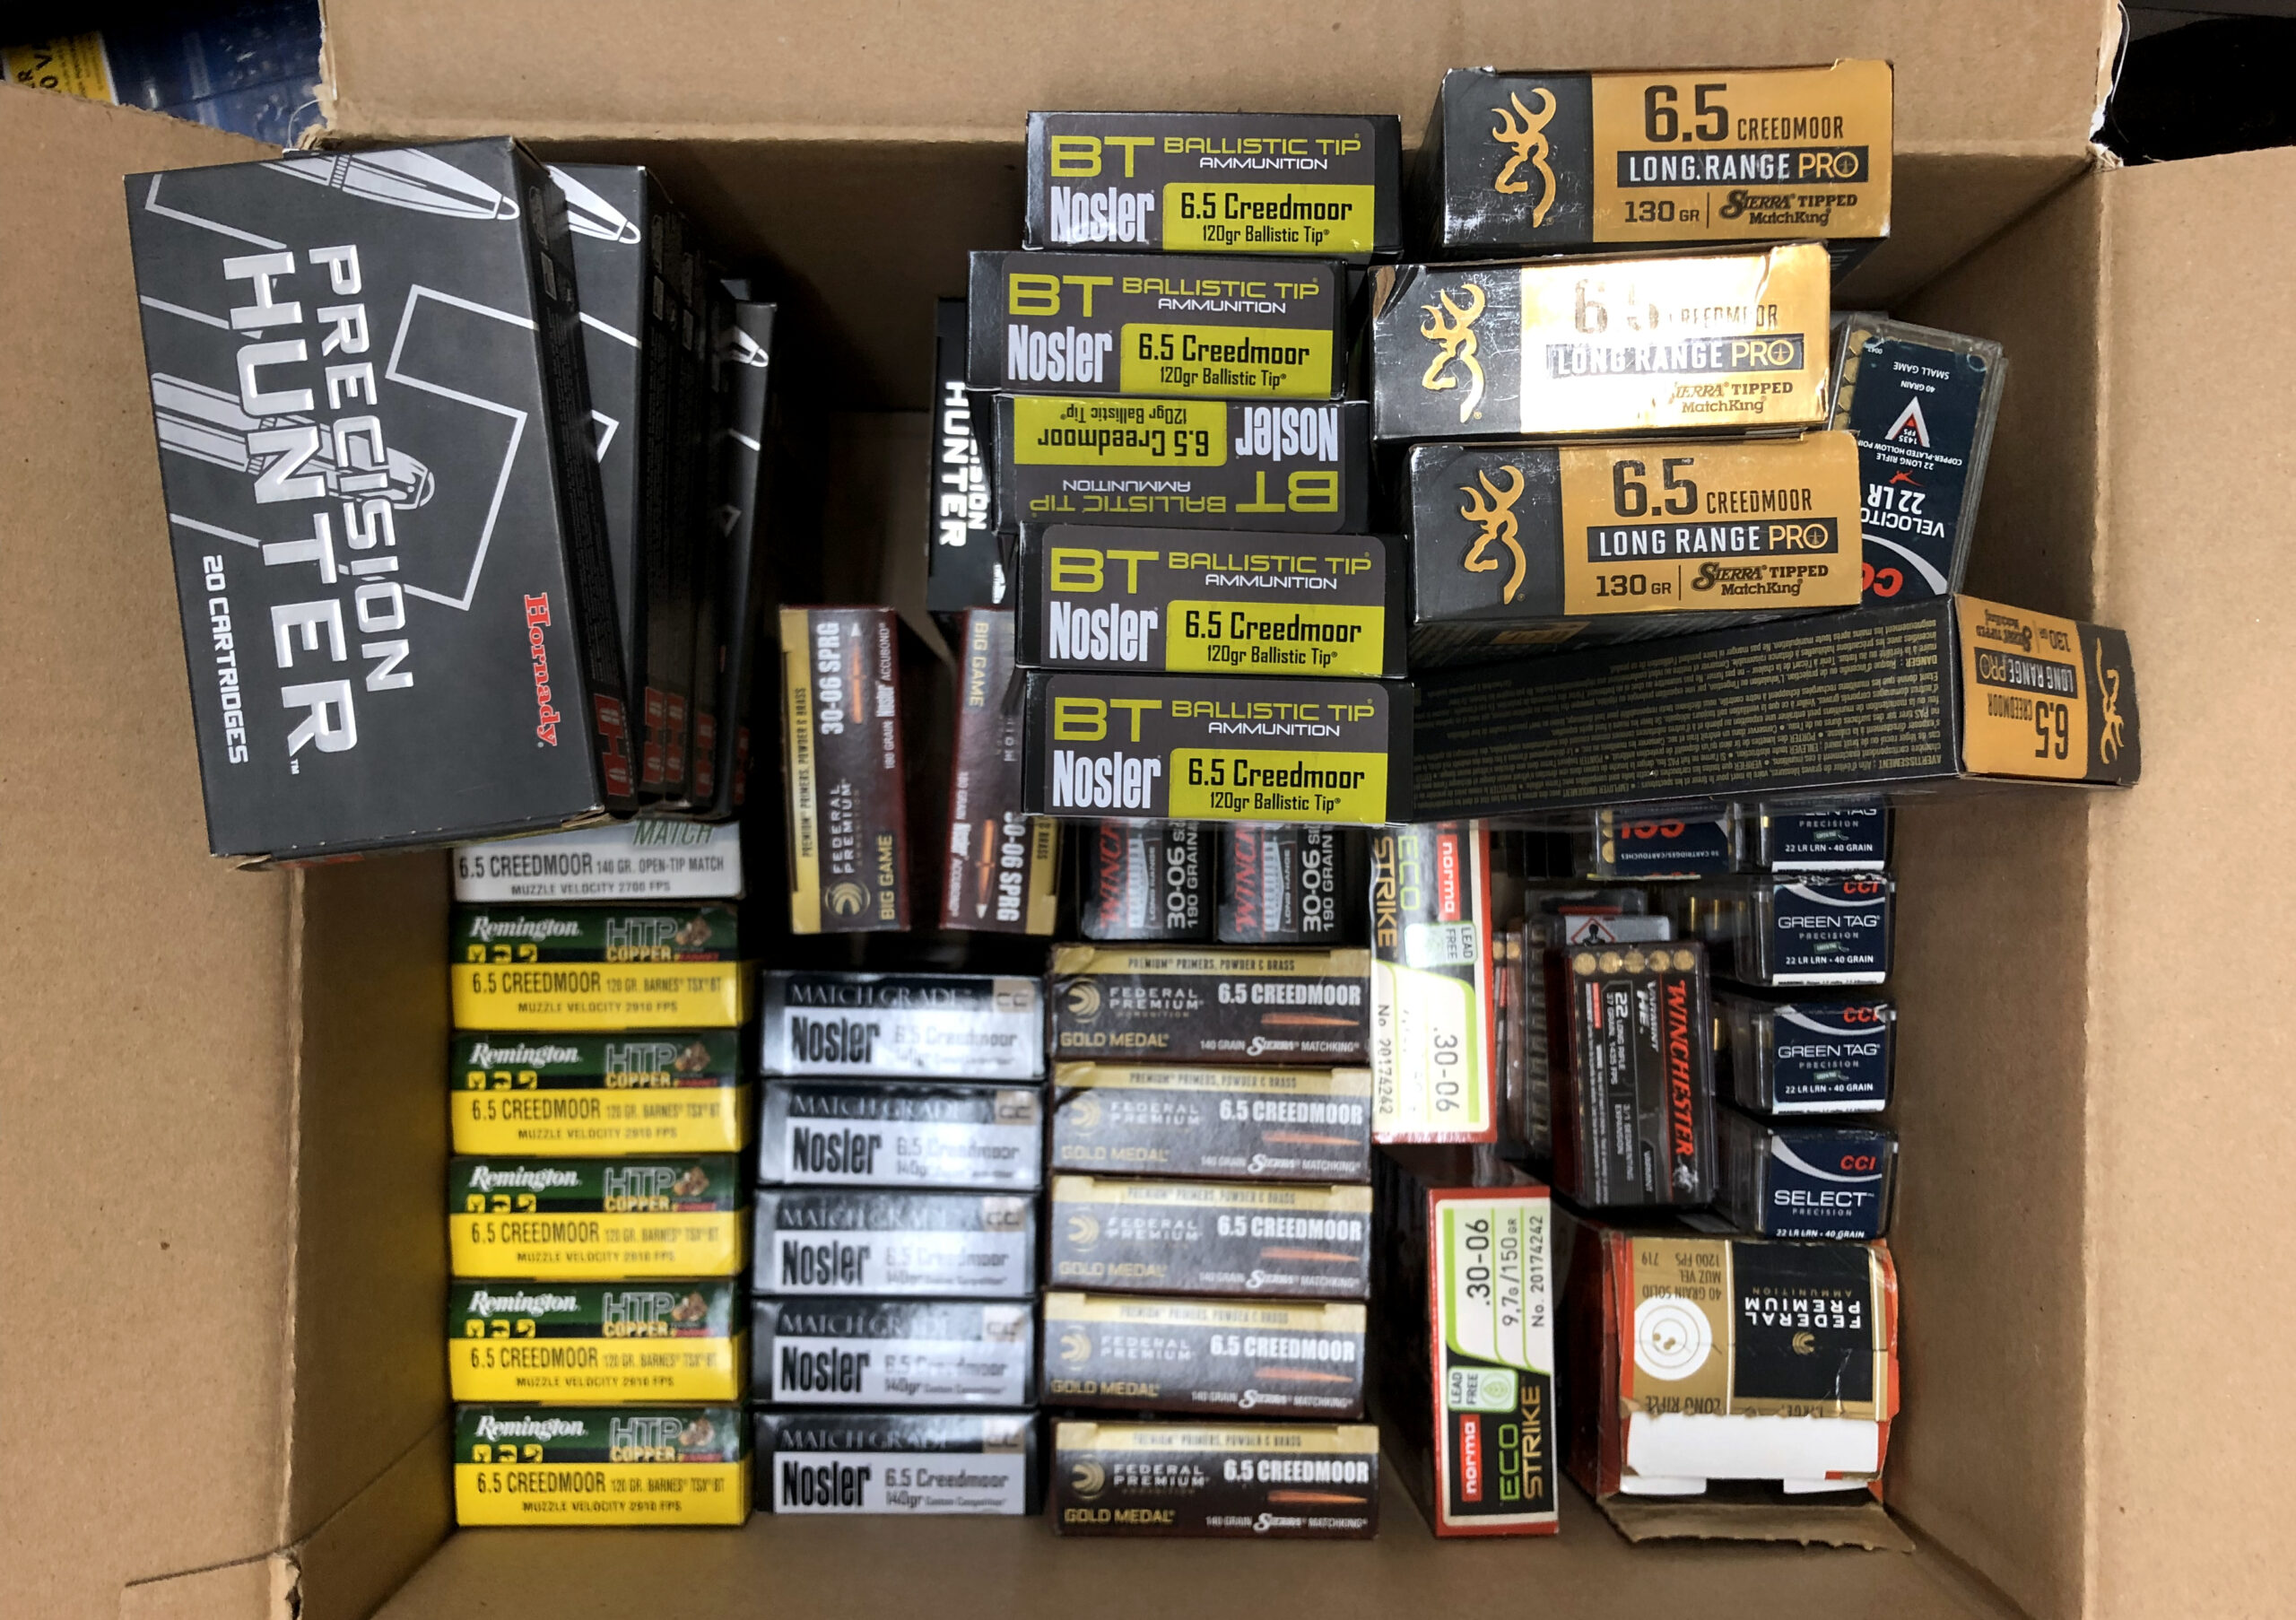 A box of 6.5 Creedmoor ammo, and how to buy ammo online for shipping